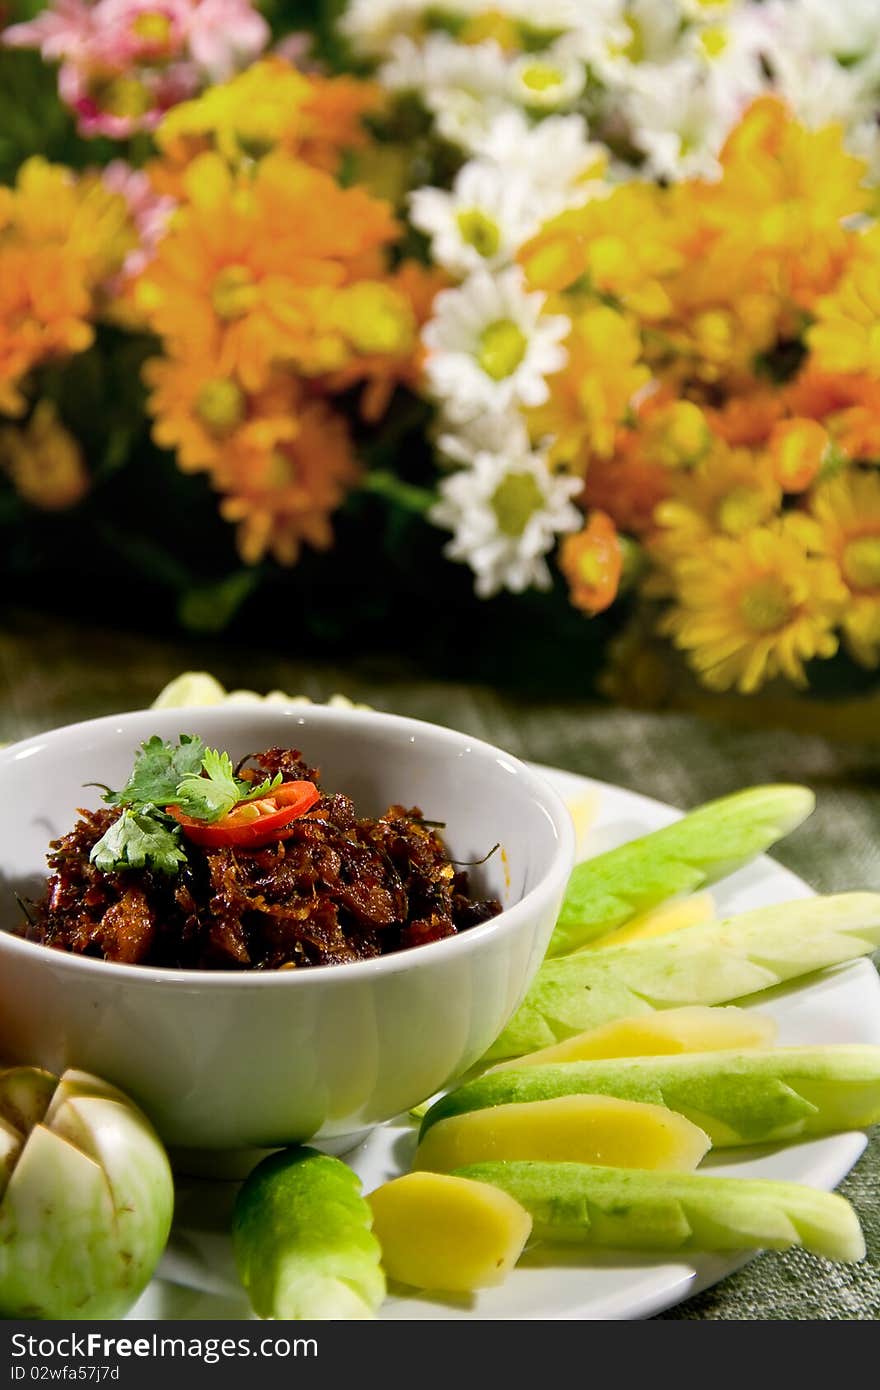 A tom yum sauce of shrimp paste and chili cuisine and vegetables with flower background